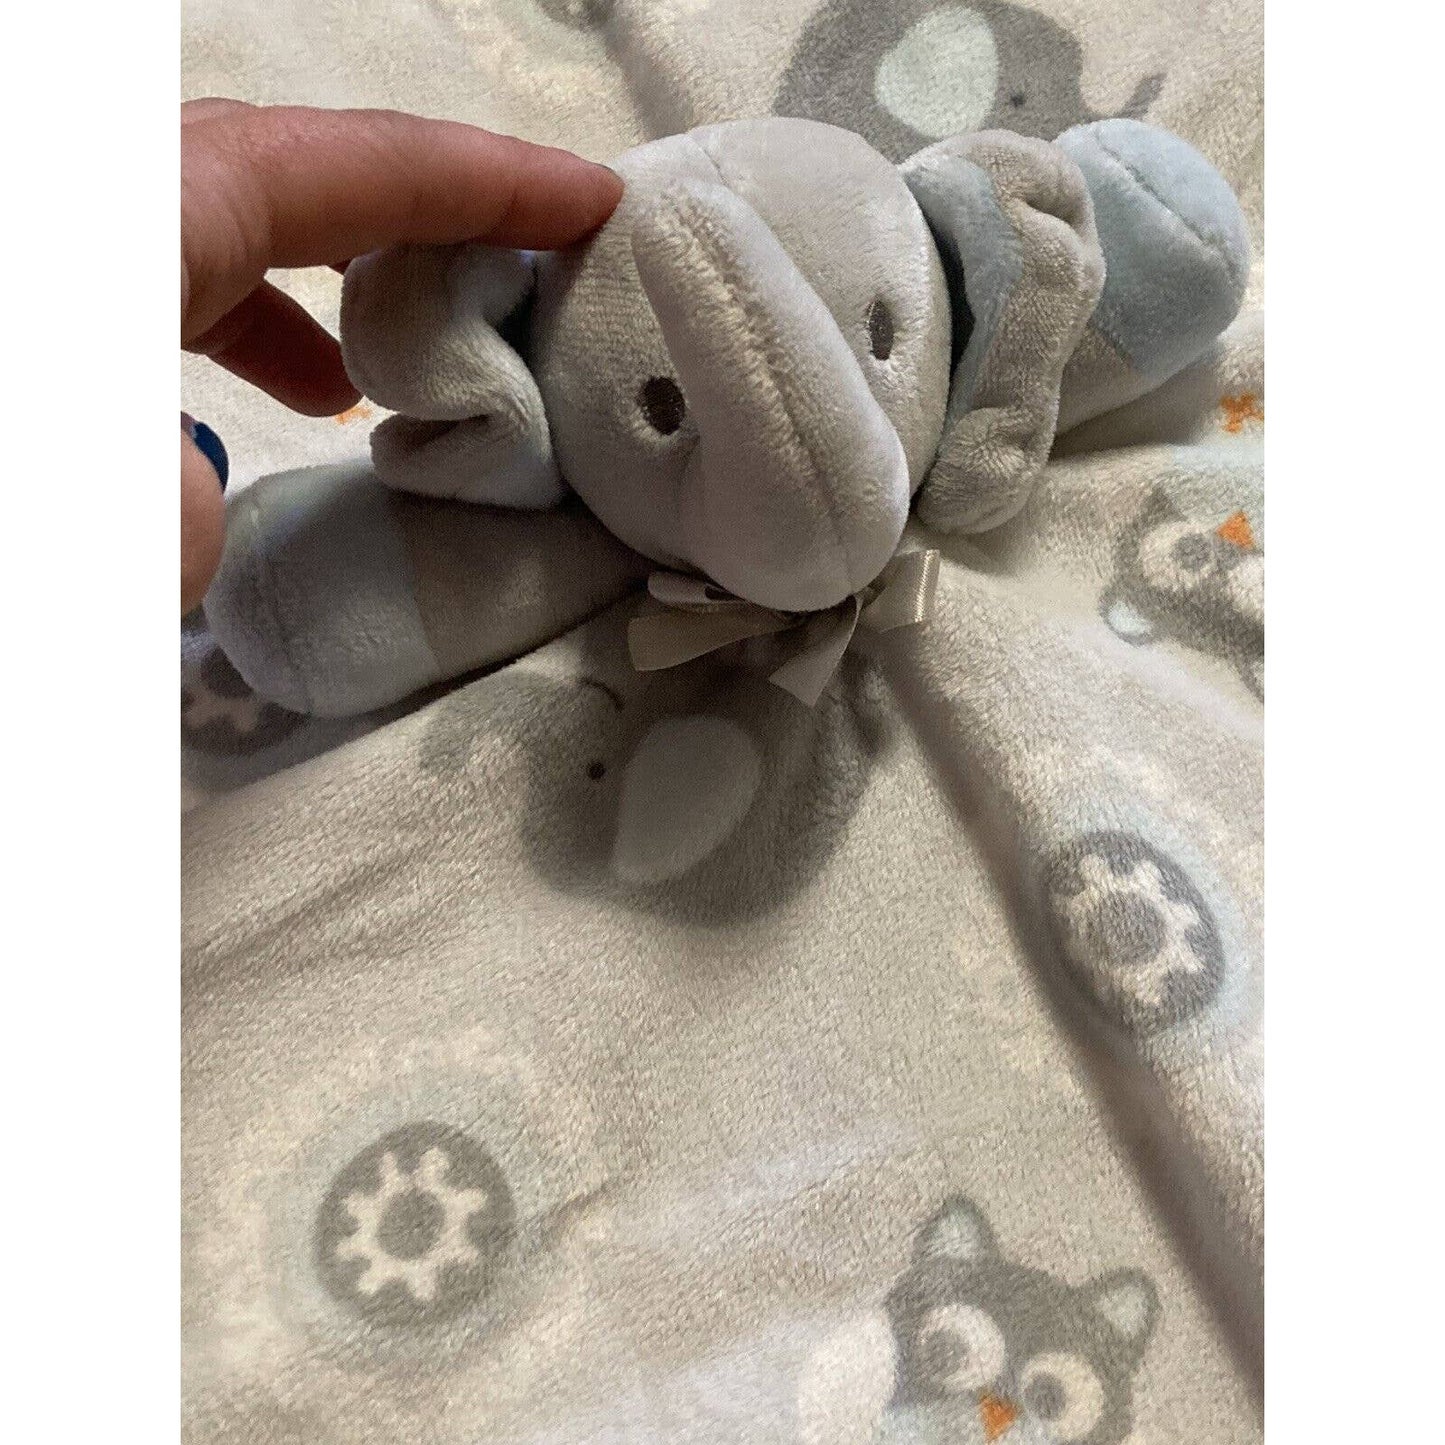 Blankets and Beyond Elephant Owl Grey Blue Plush Baby Lovey Security Blanket